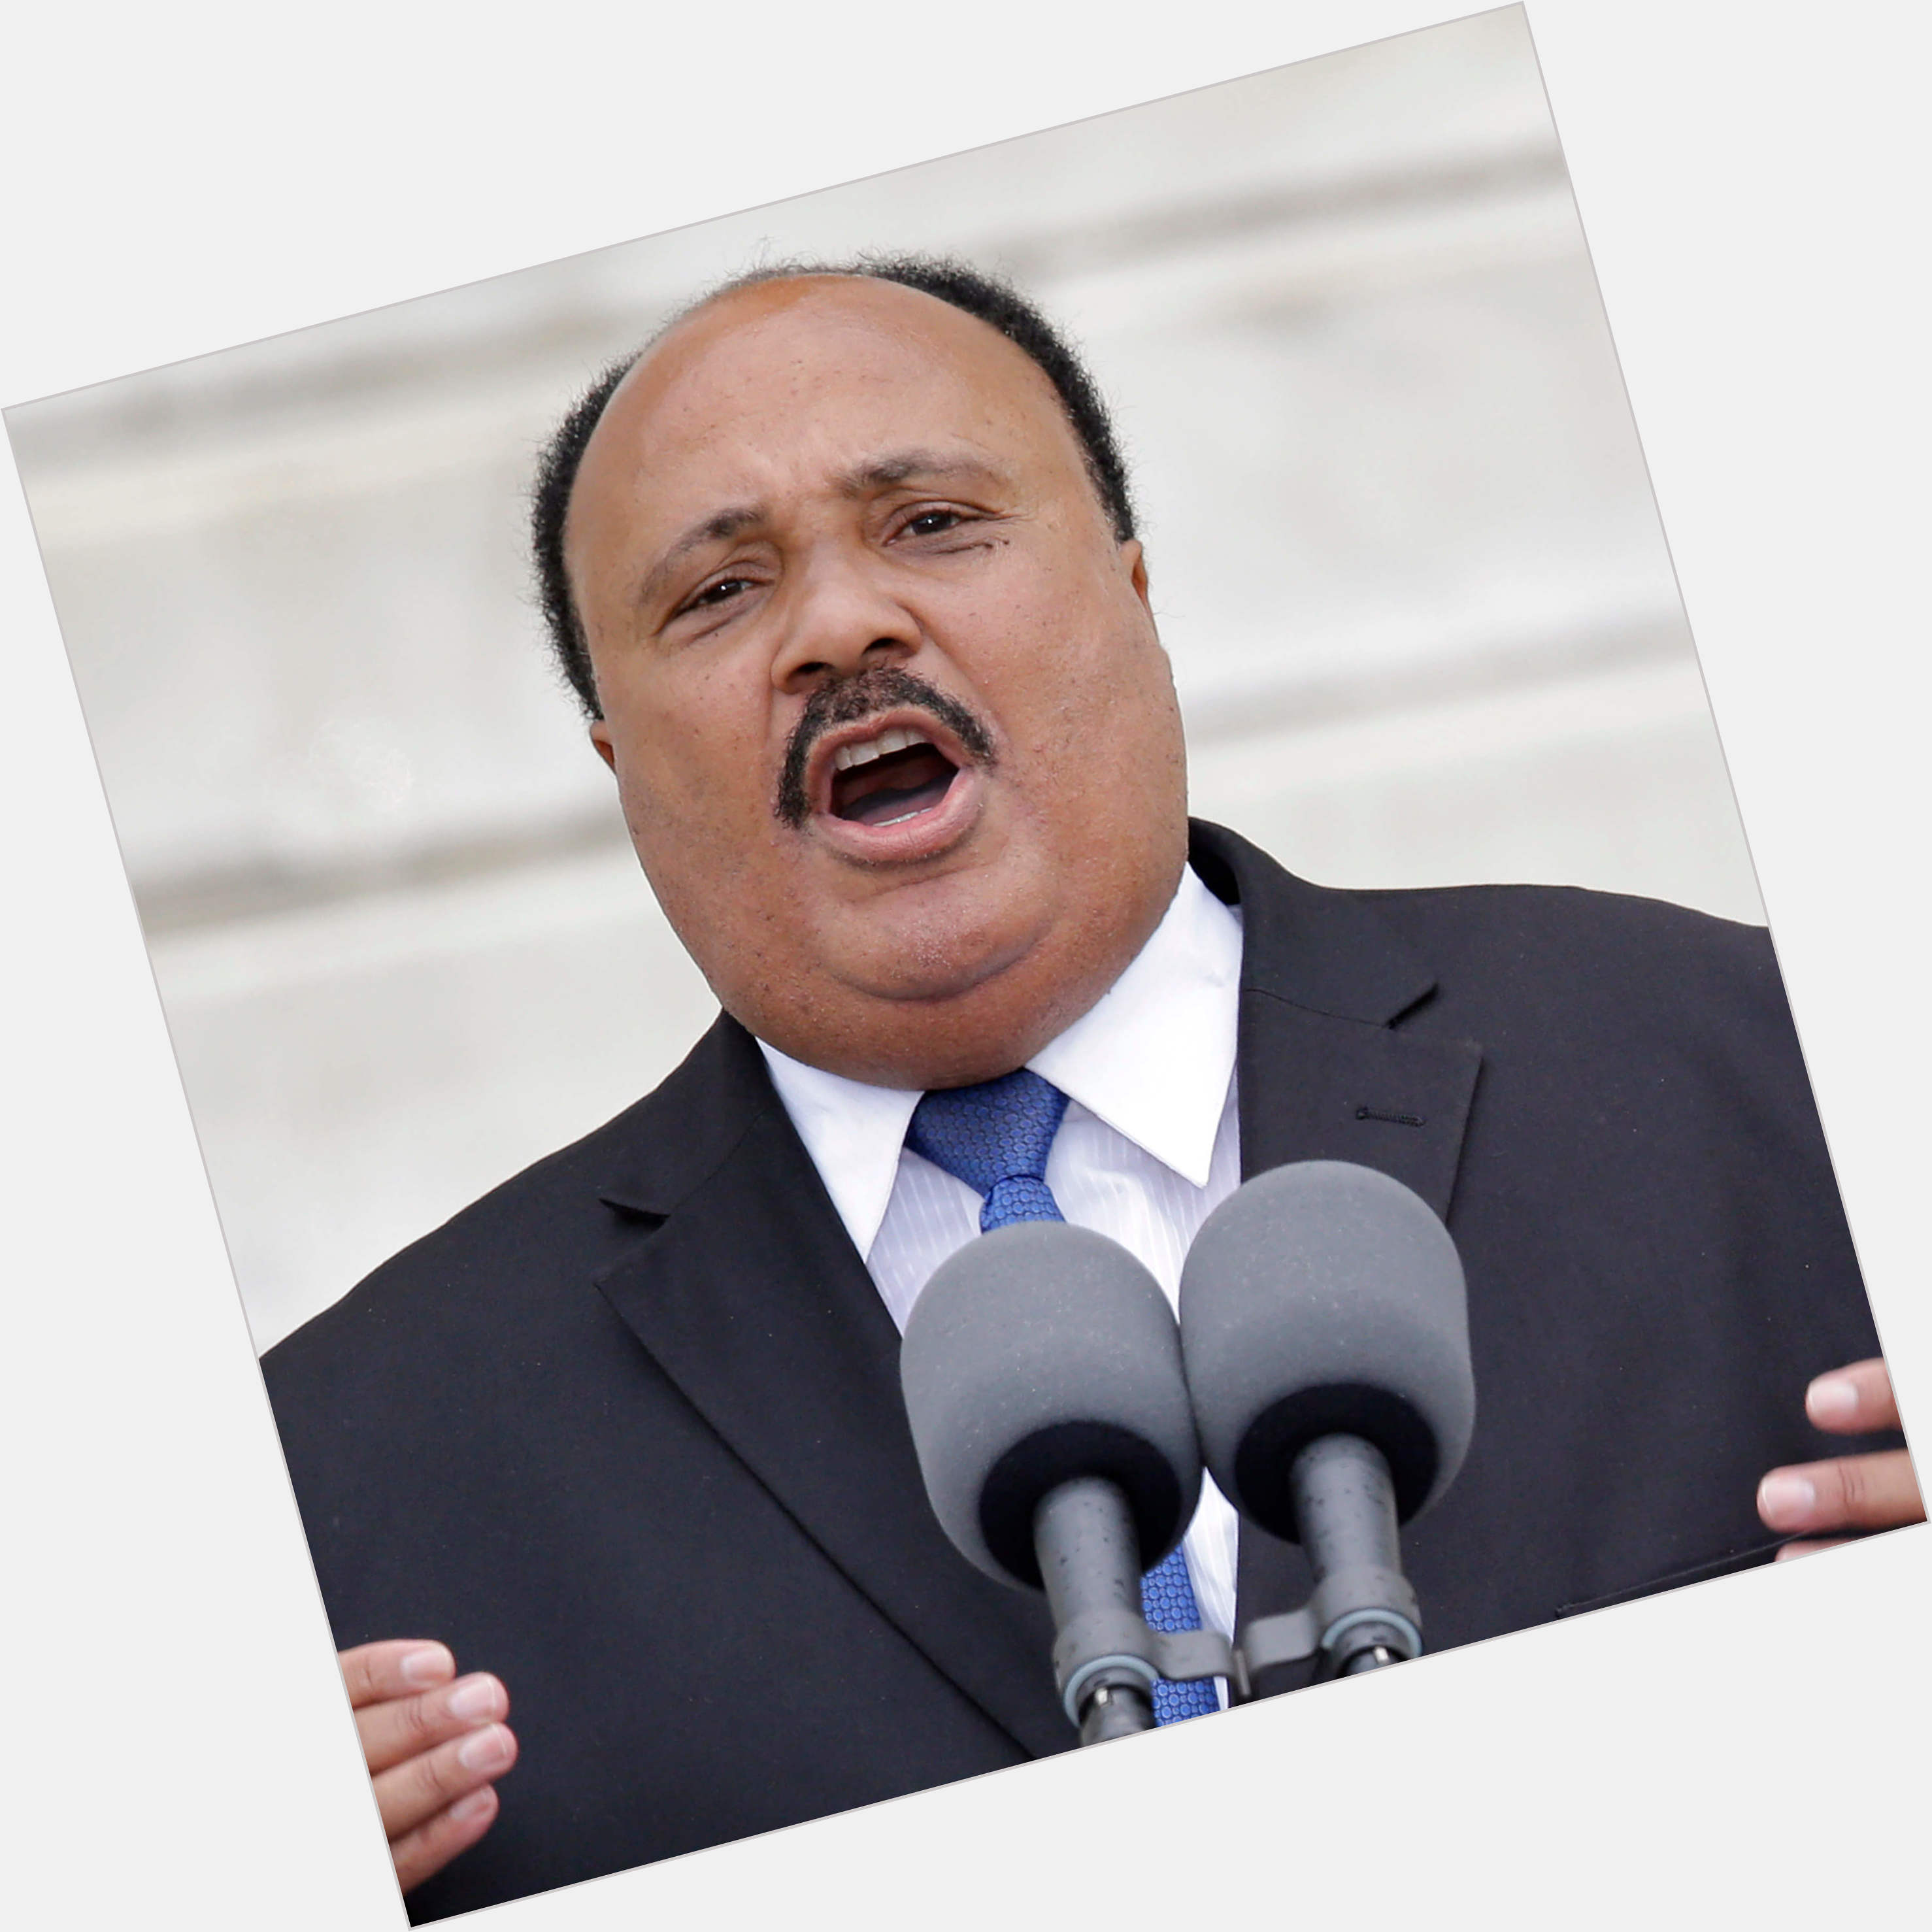 <a href="/hot-men/martin-luther-king-iii/where-dating-news-photos">Martin Luther King Iii</a>  